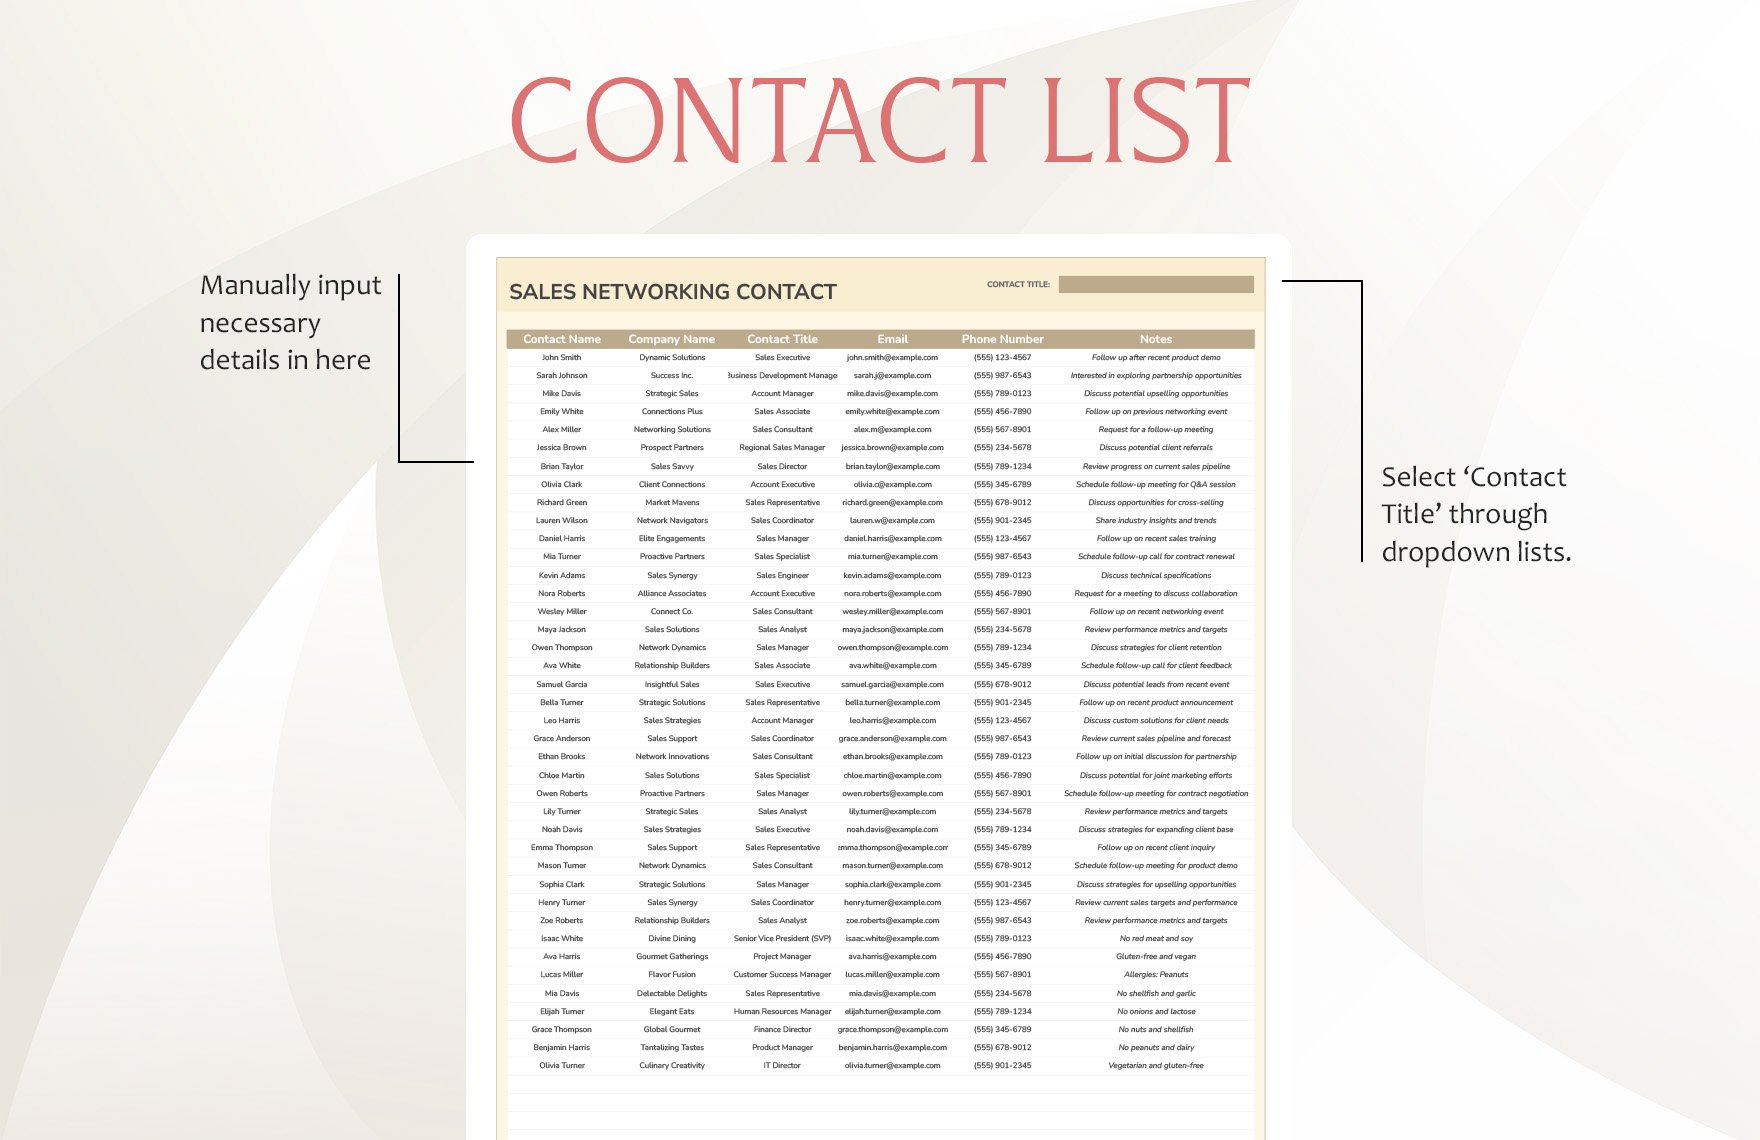 Sales Networking Contact List Template